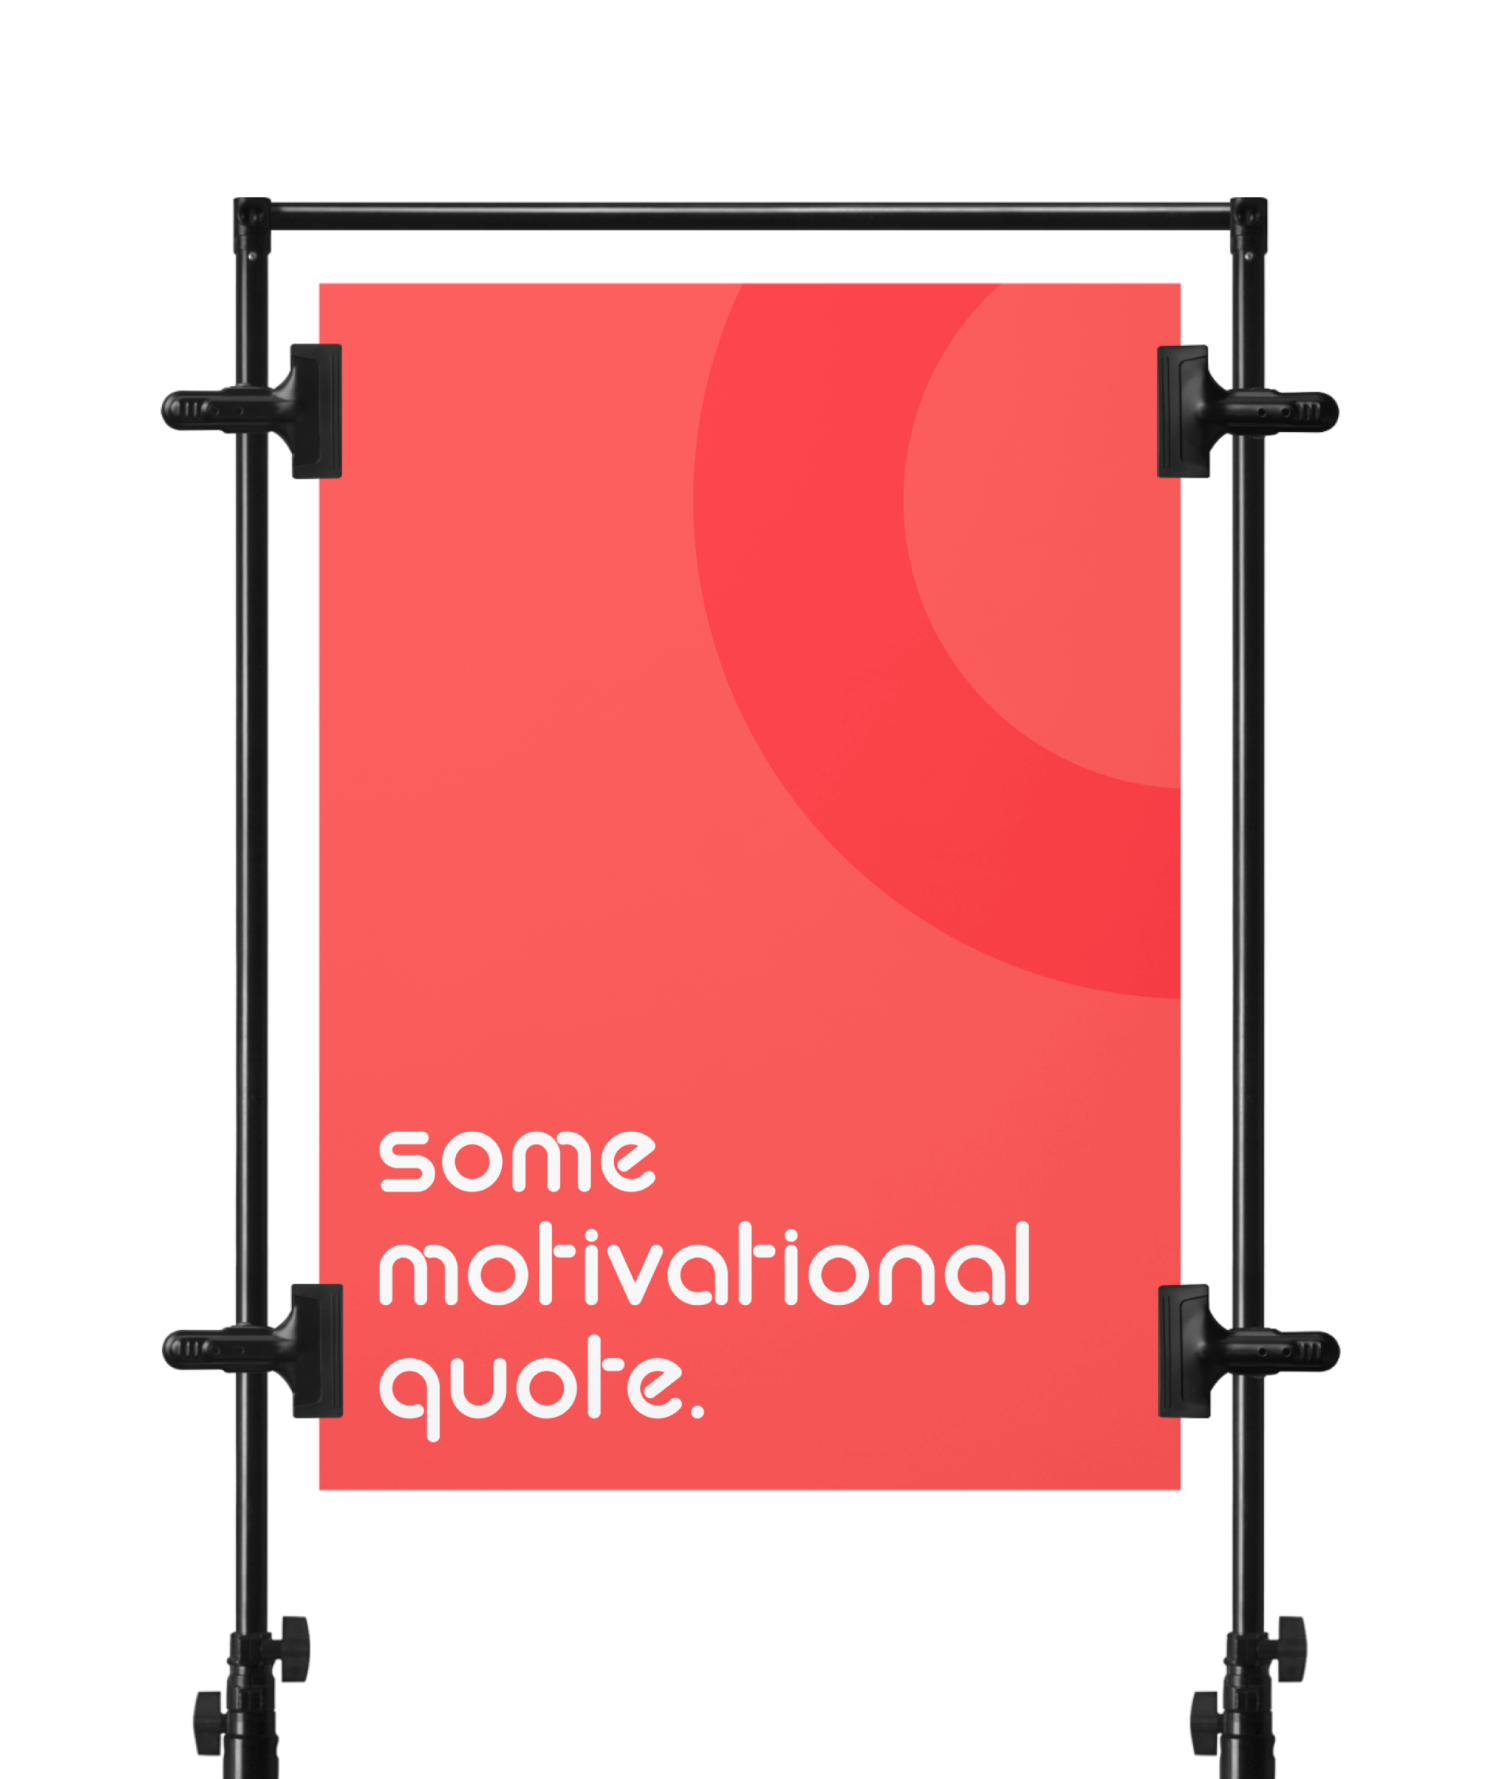 Poster with text "some motivational quote" in Orbis Rounded.